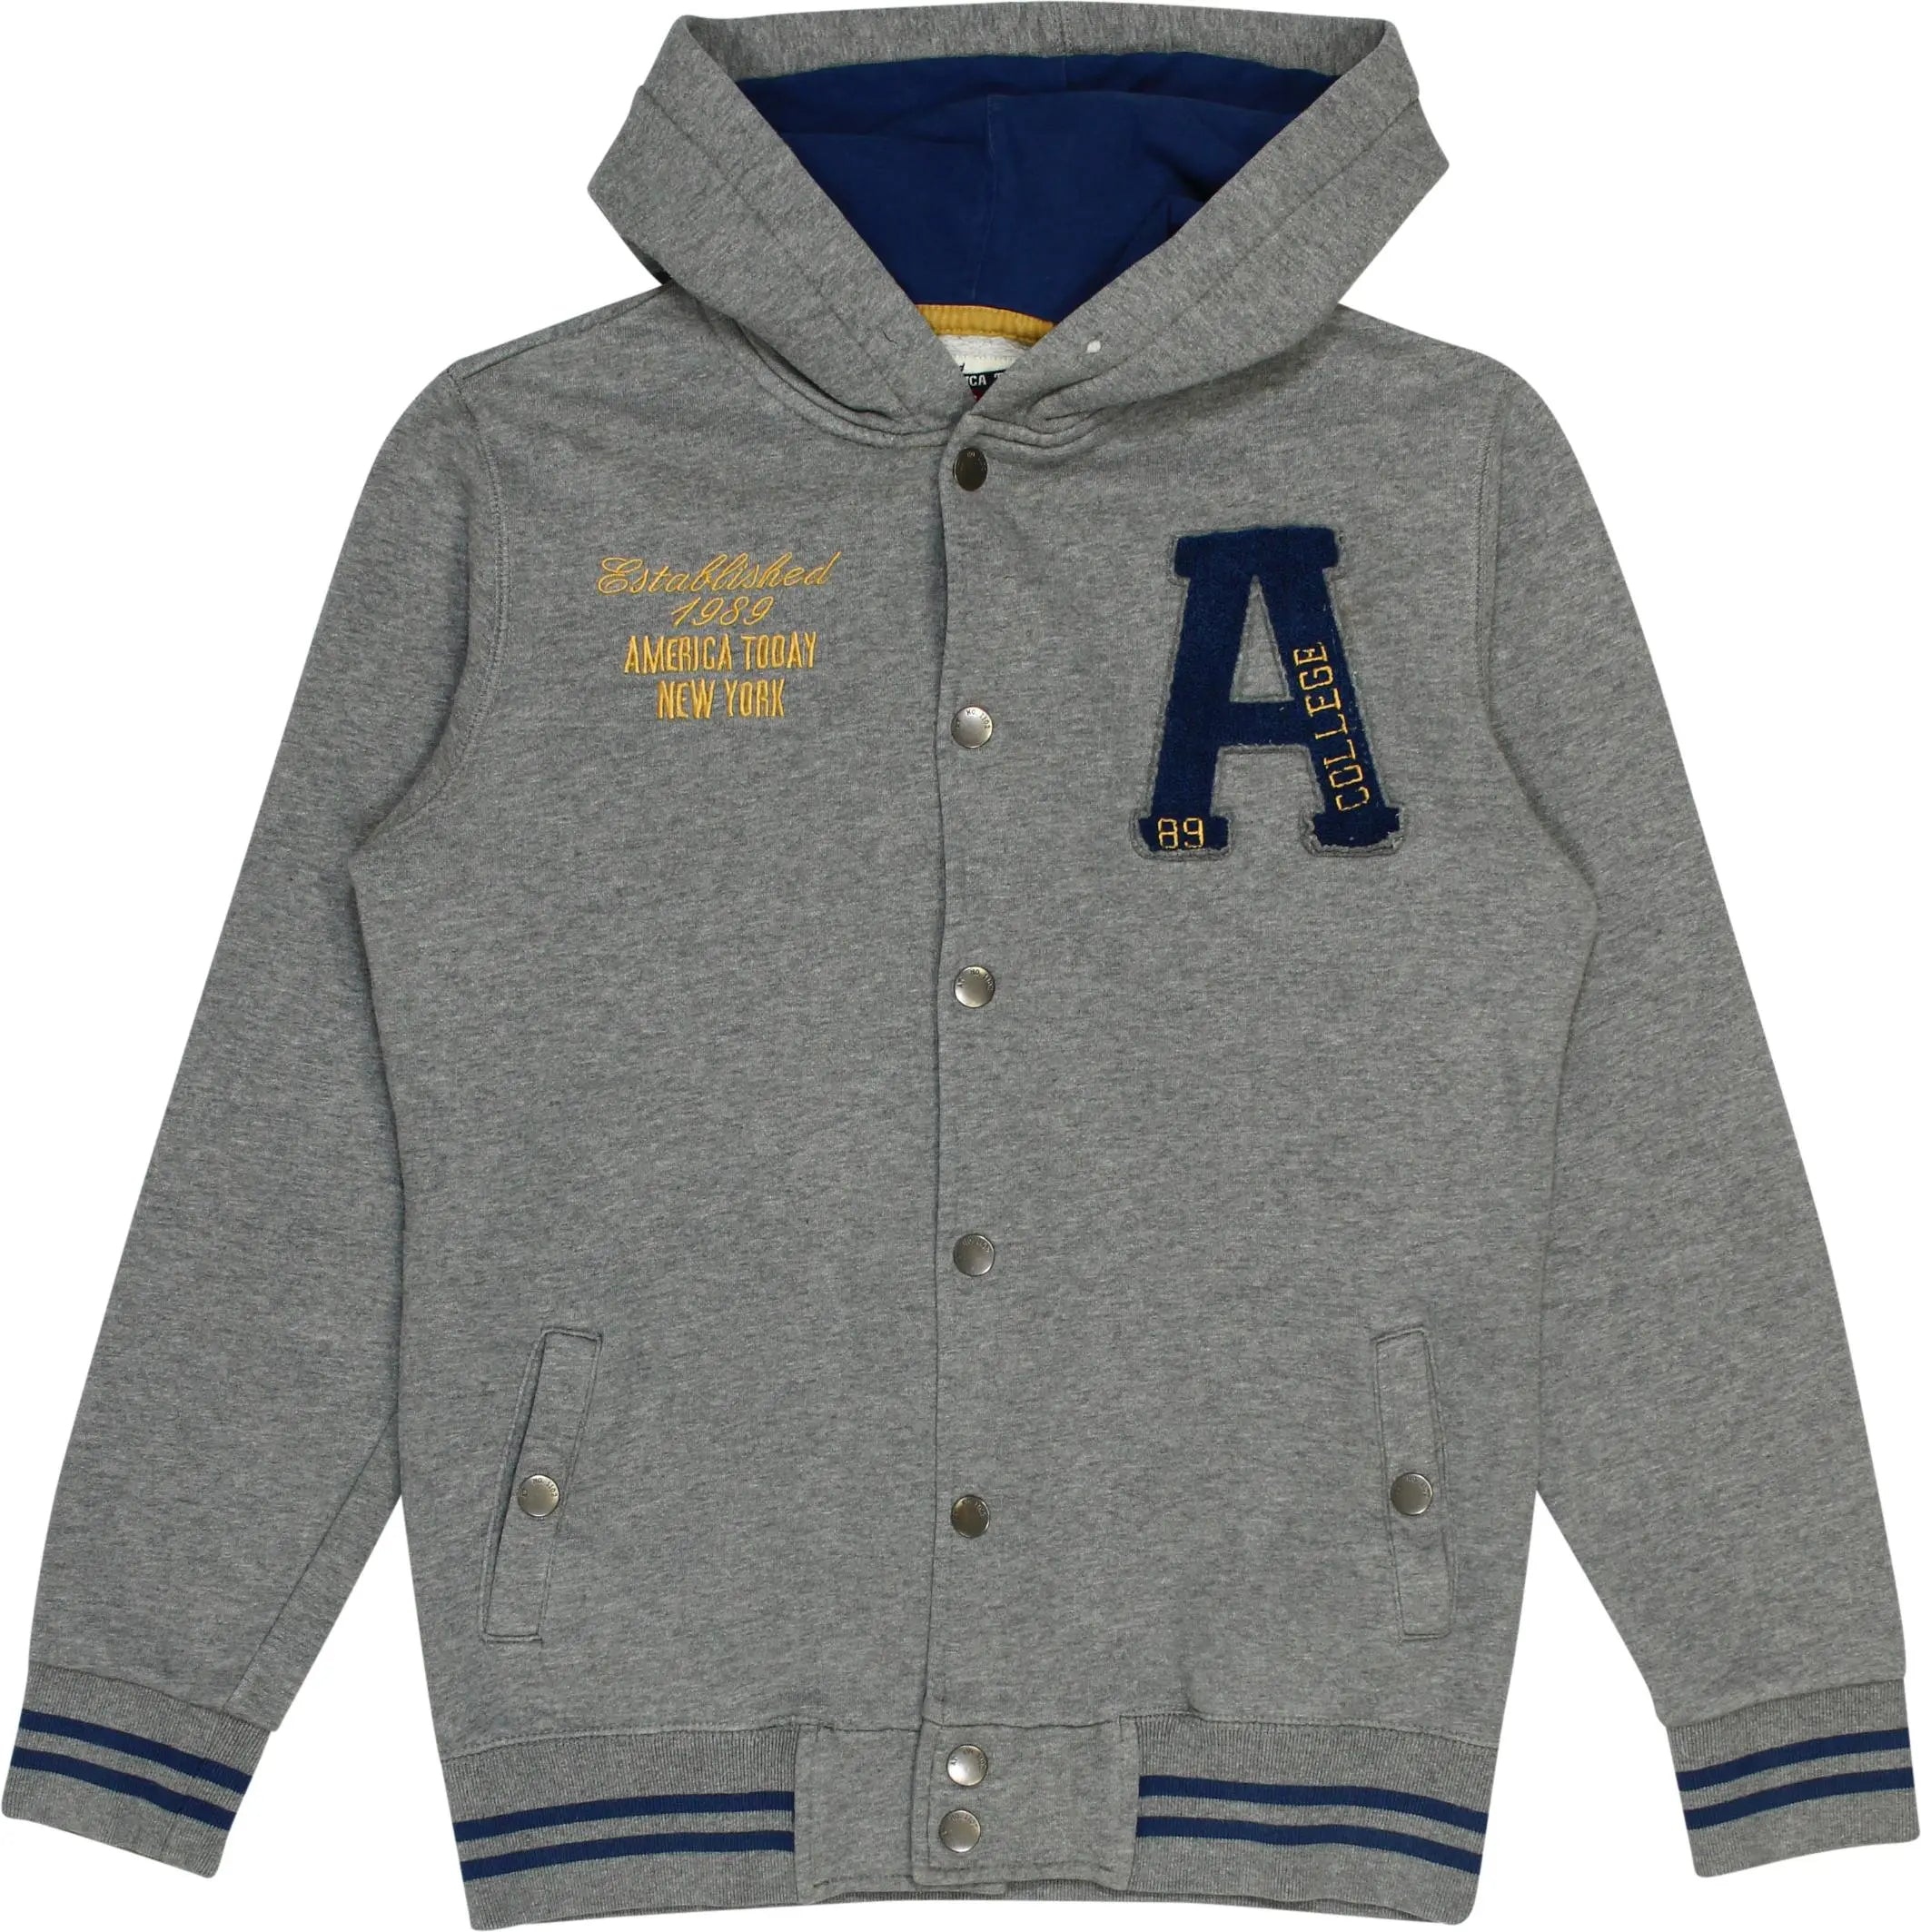 America Today - College Hoodie Jacket- ThriftTale.com - Vintage and second handclothing